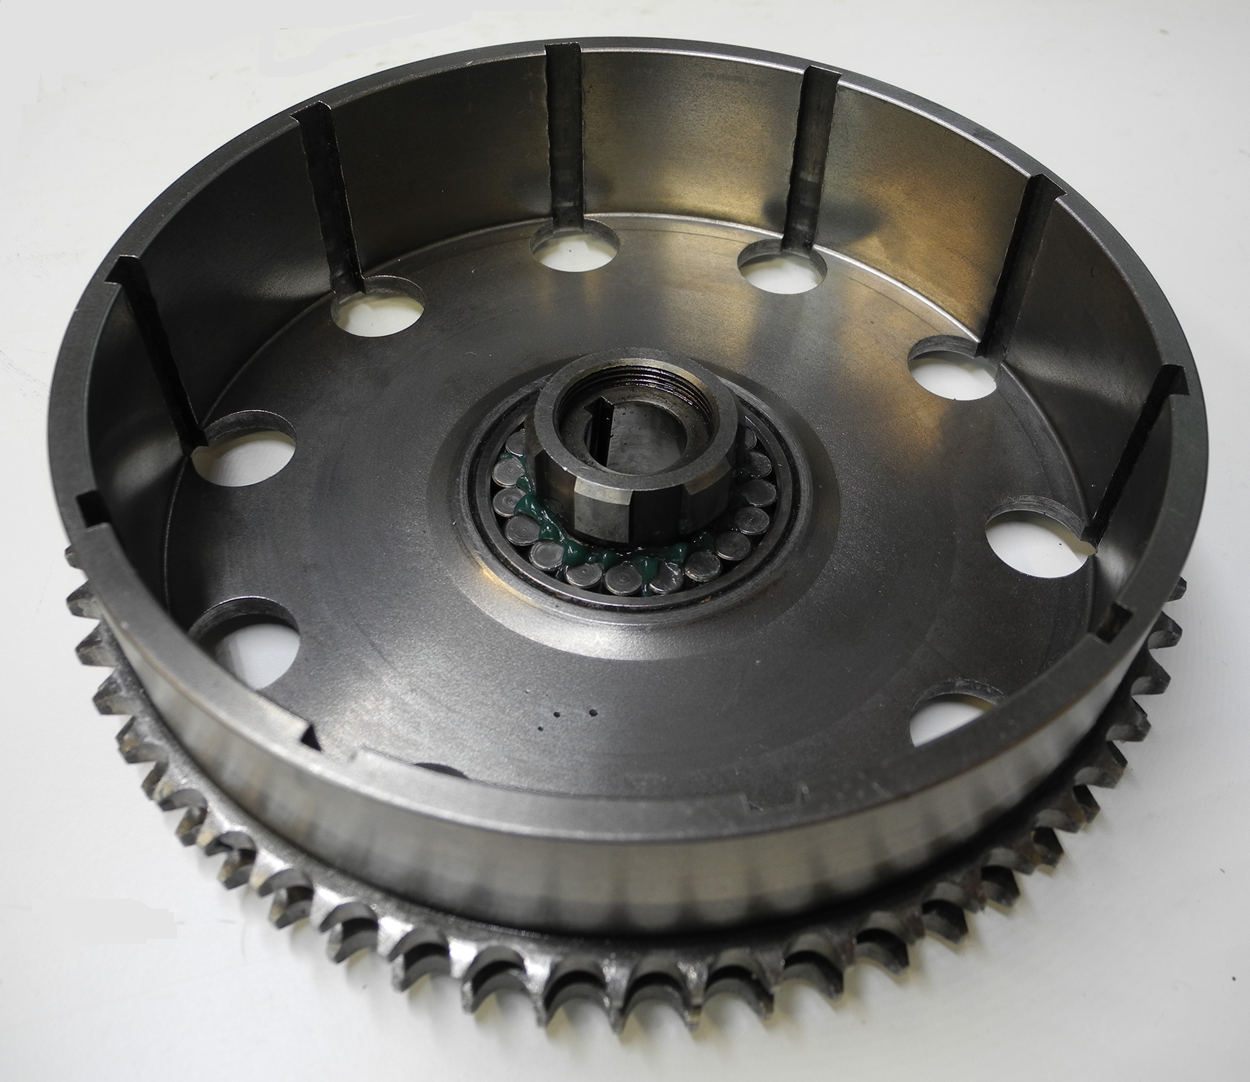 Photo of the duplex sprocket intalled over the rollers and clutch hub